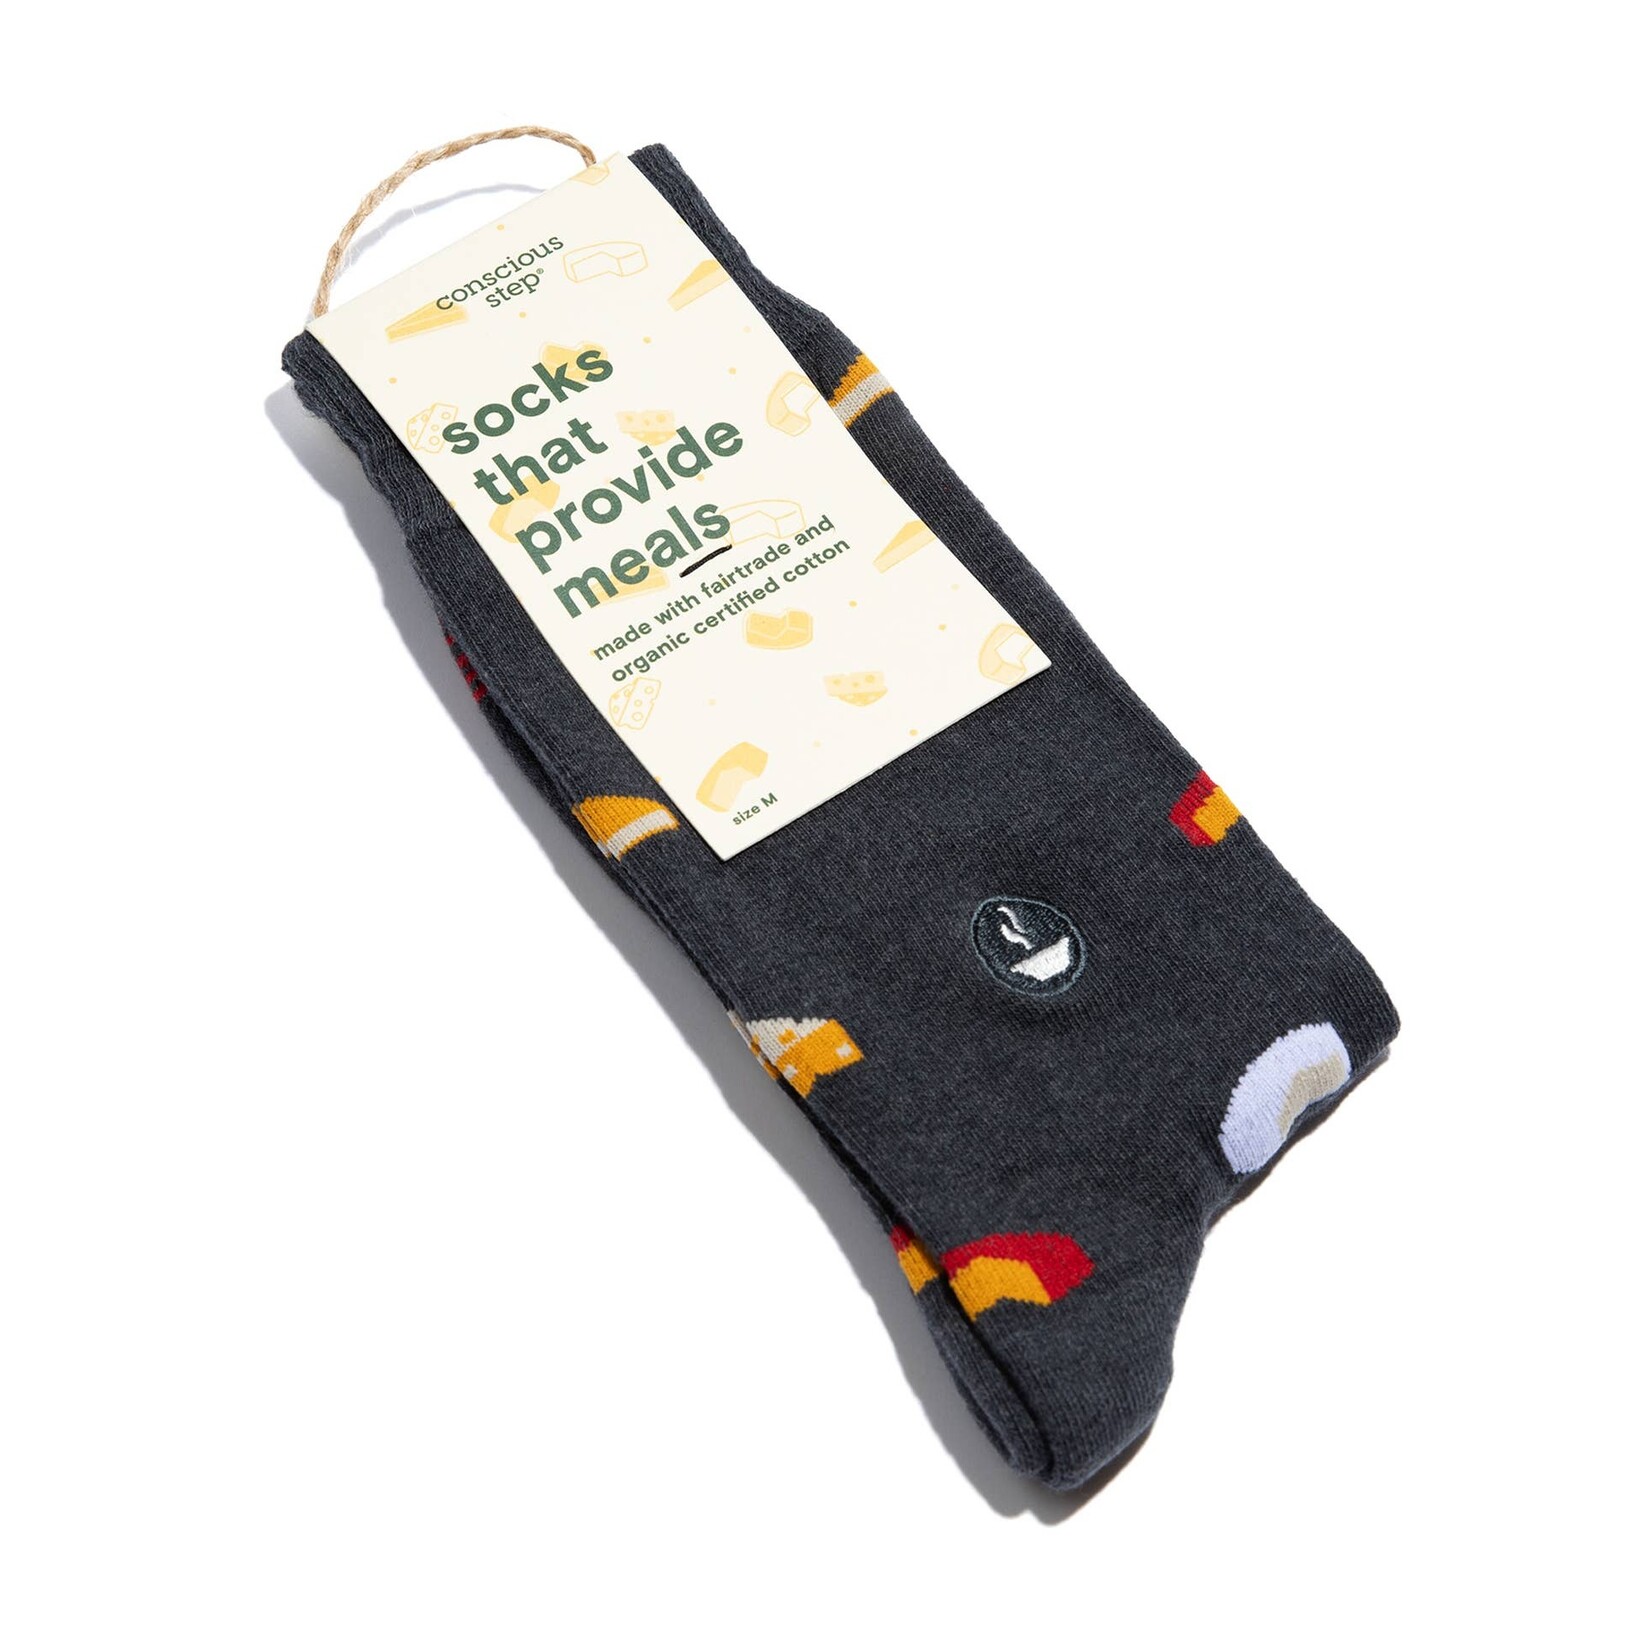 Conscious Step Socks that Provide Meals (Gray Cheese) SM